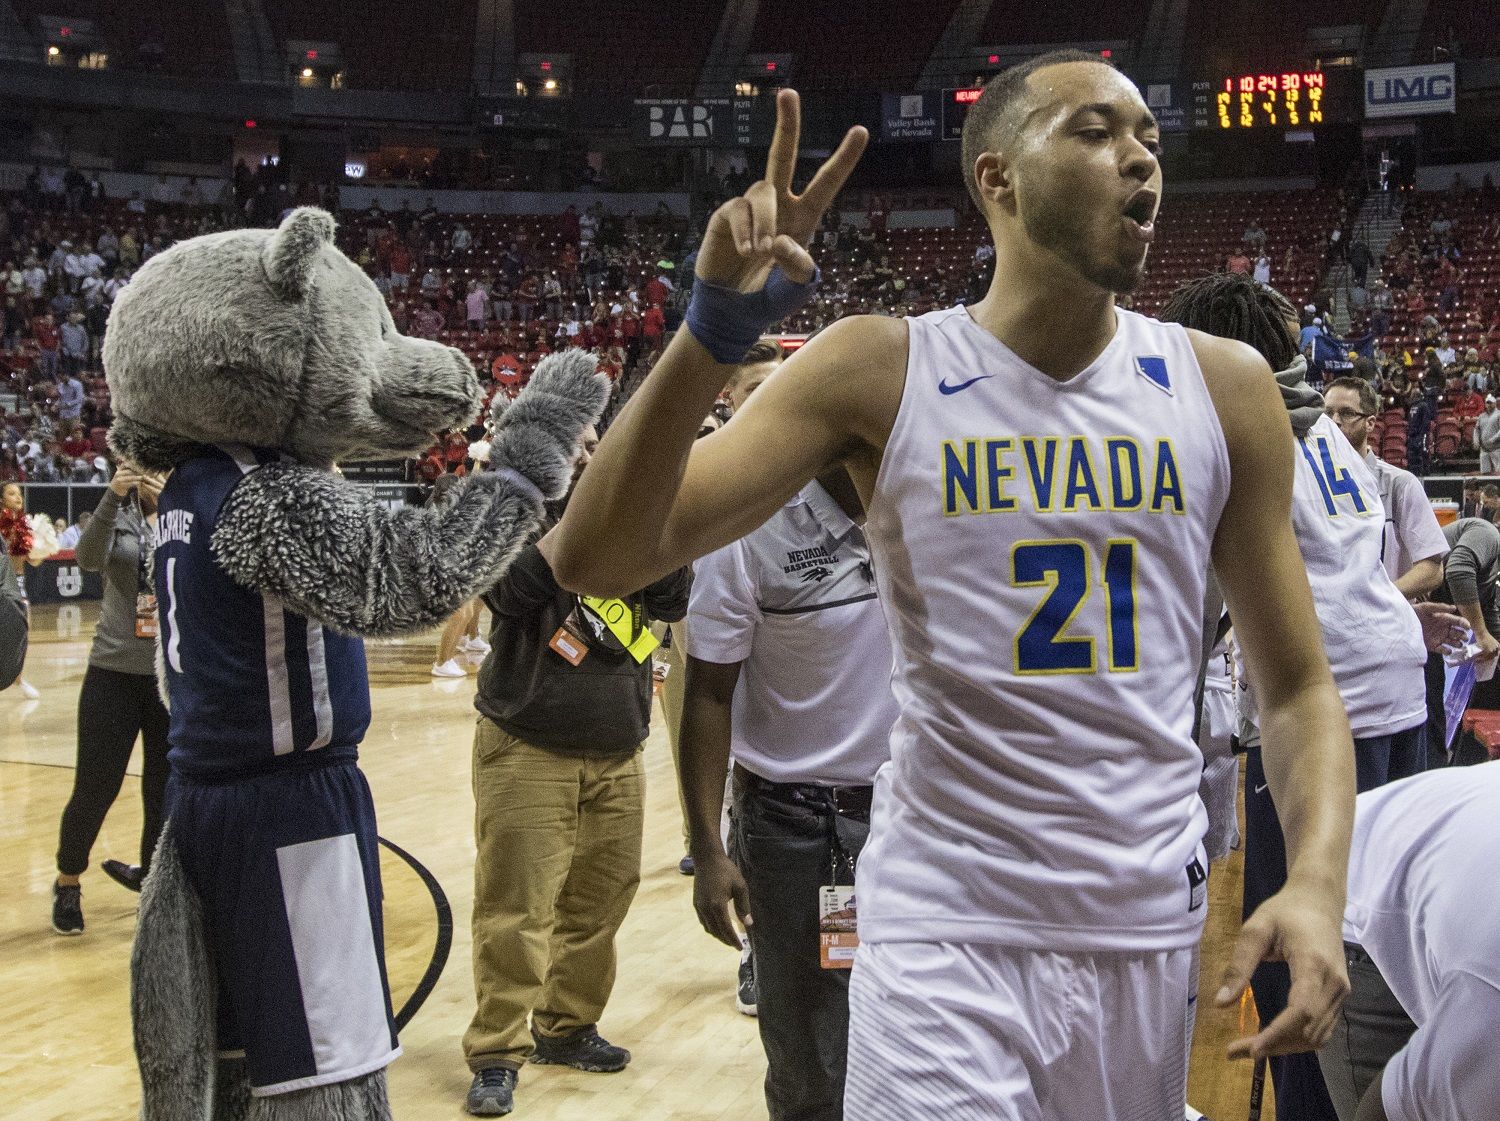 Nevada guard Kendall Stephens (21) celebrates with the fans after his team wins 79-74 over UNLV  following the second half of an NCAA college basketball quarterfinals game in the Mountain West Conference tournament, Thursday, March 8, 2018, in Las Vegas. (AP Photo/L.E. Baskow)